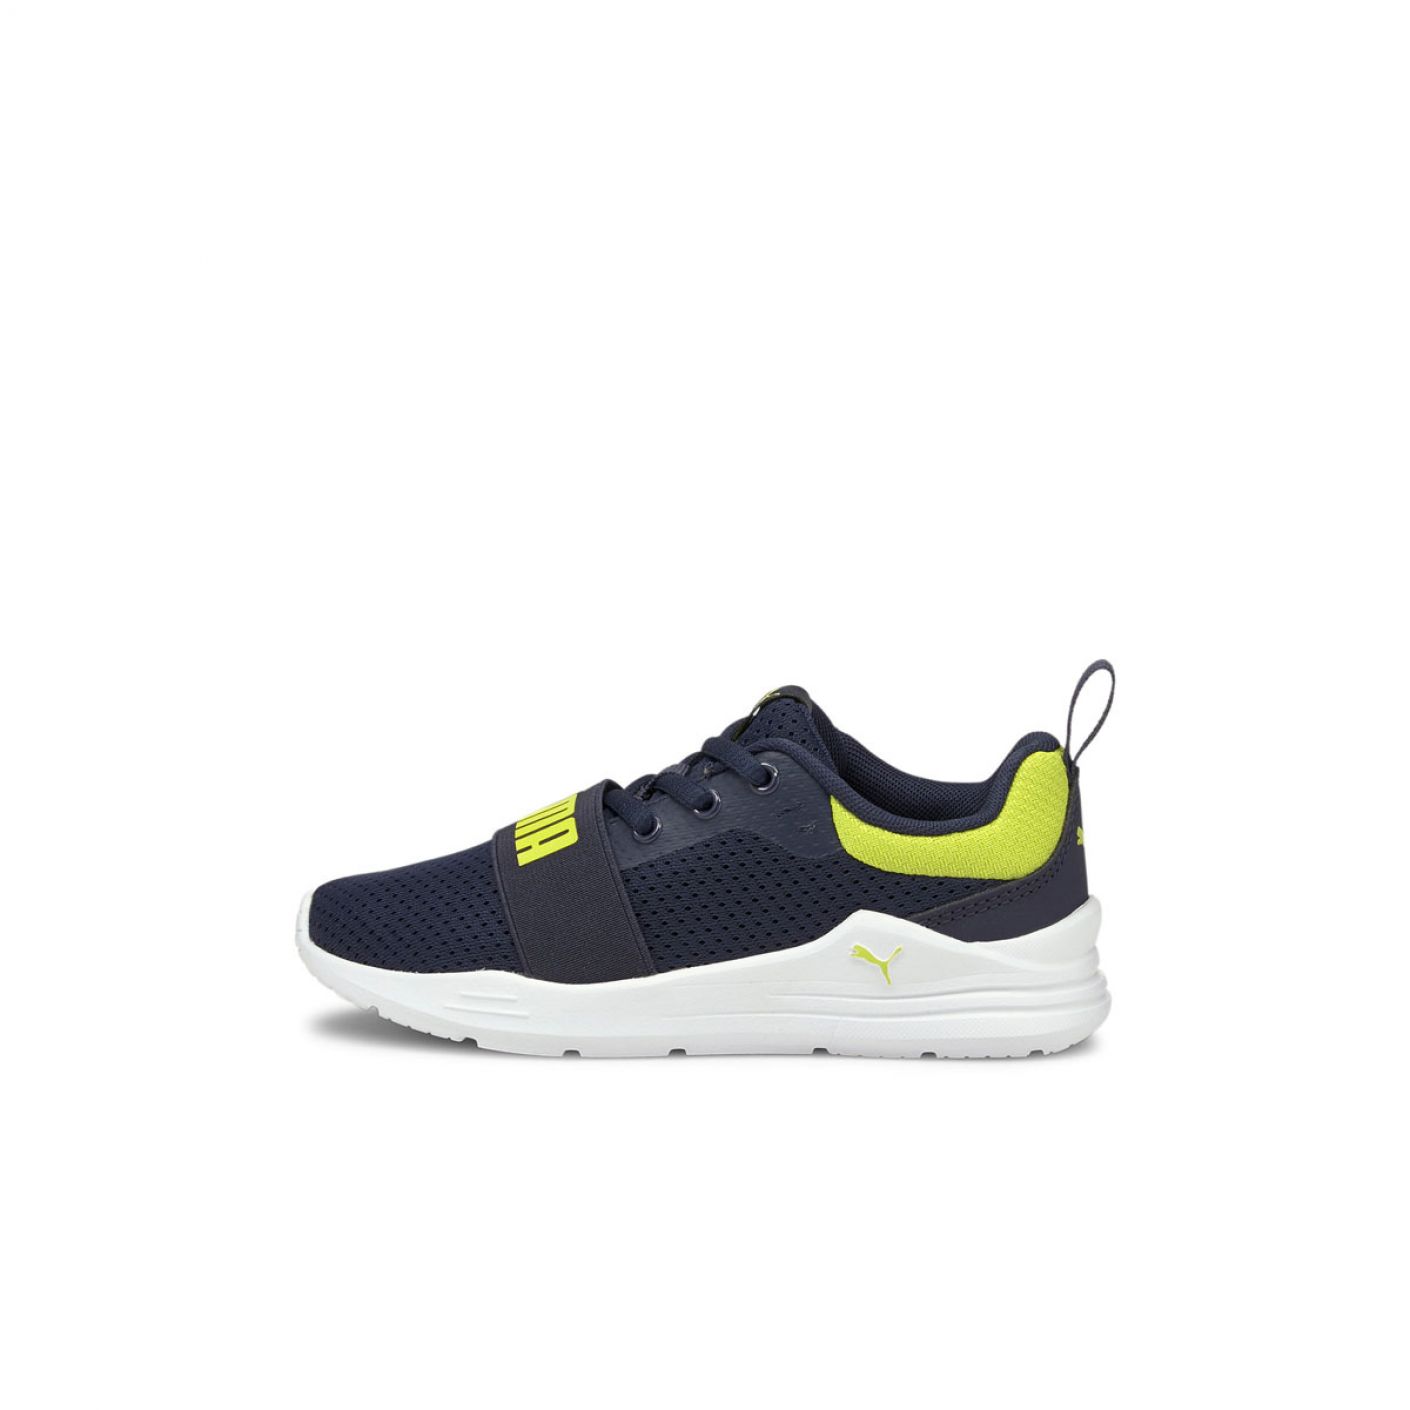 Puma Wired Run Ps Peacoat-Sulfur Spring